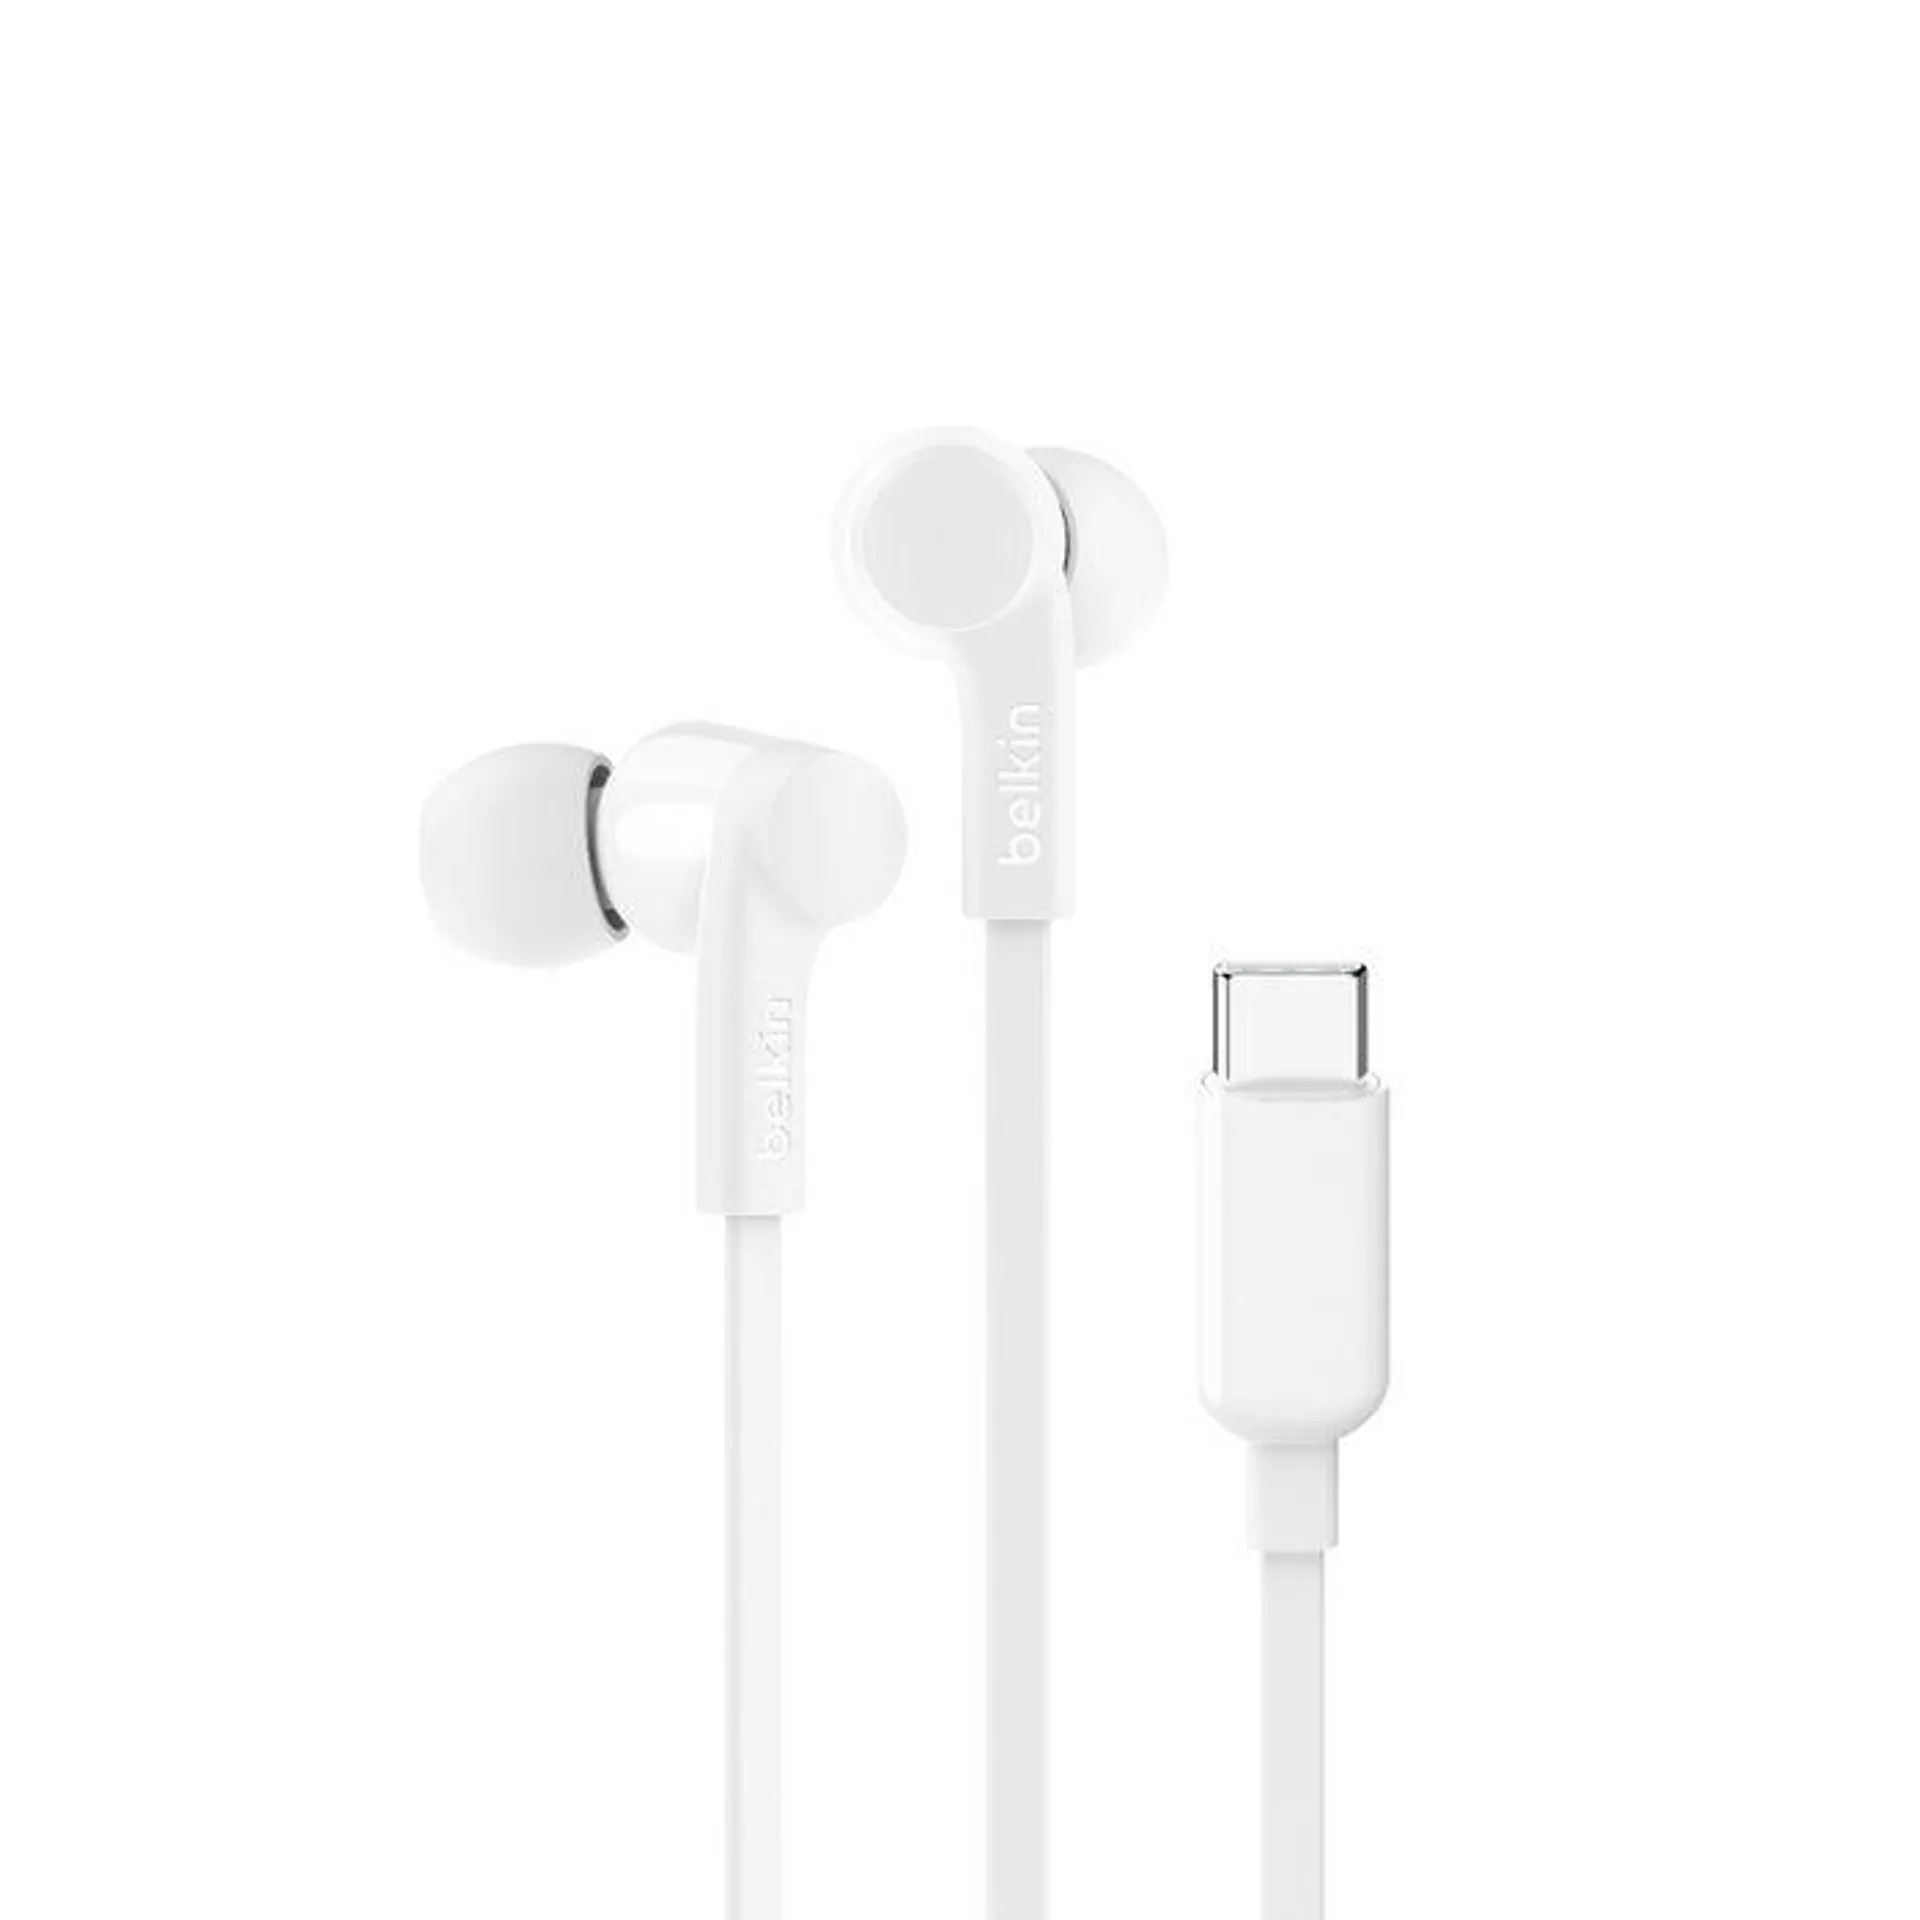 Belkin SoundForm In-Ear Headphones with USB-C Connector - White